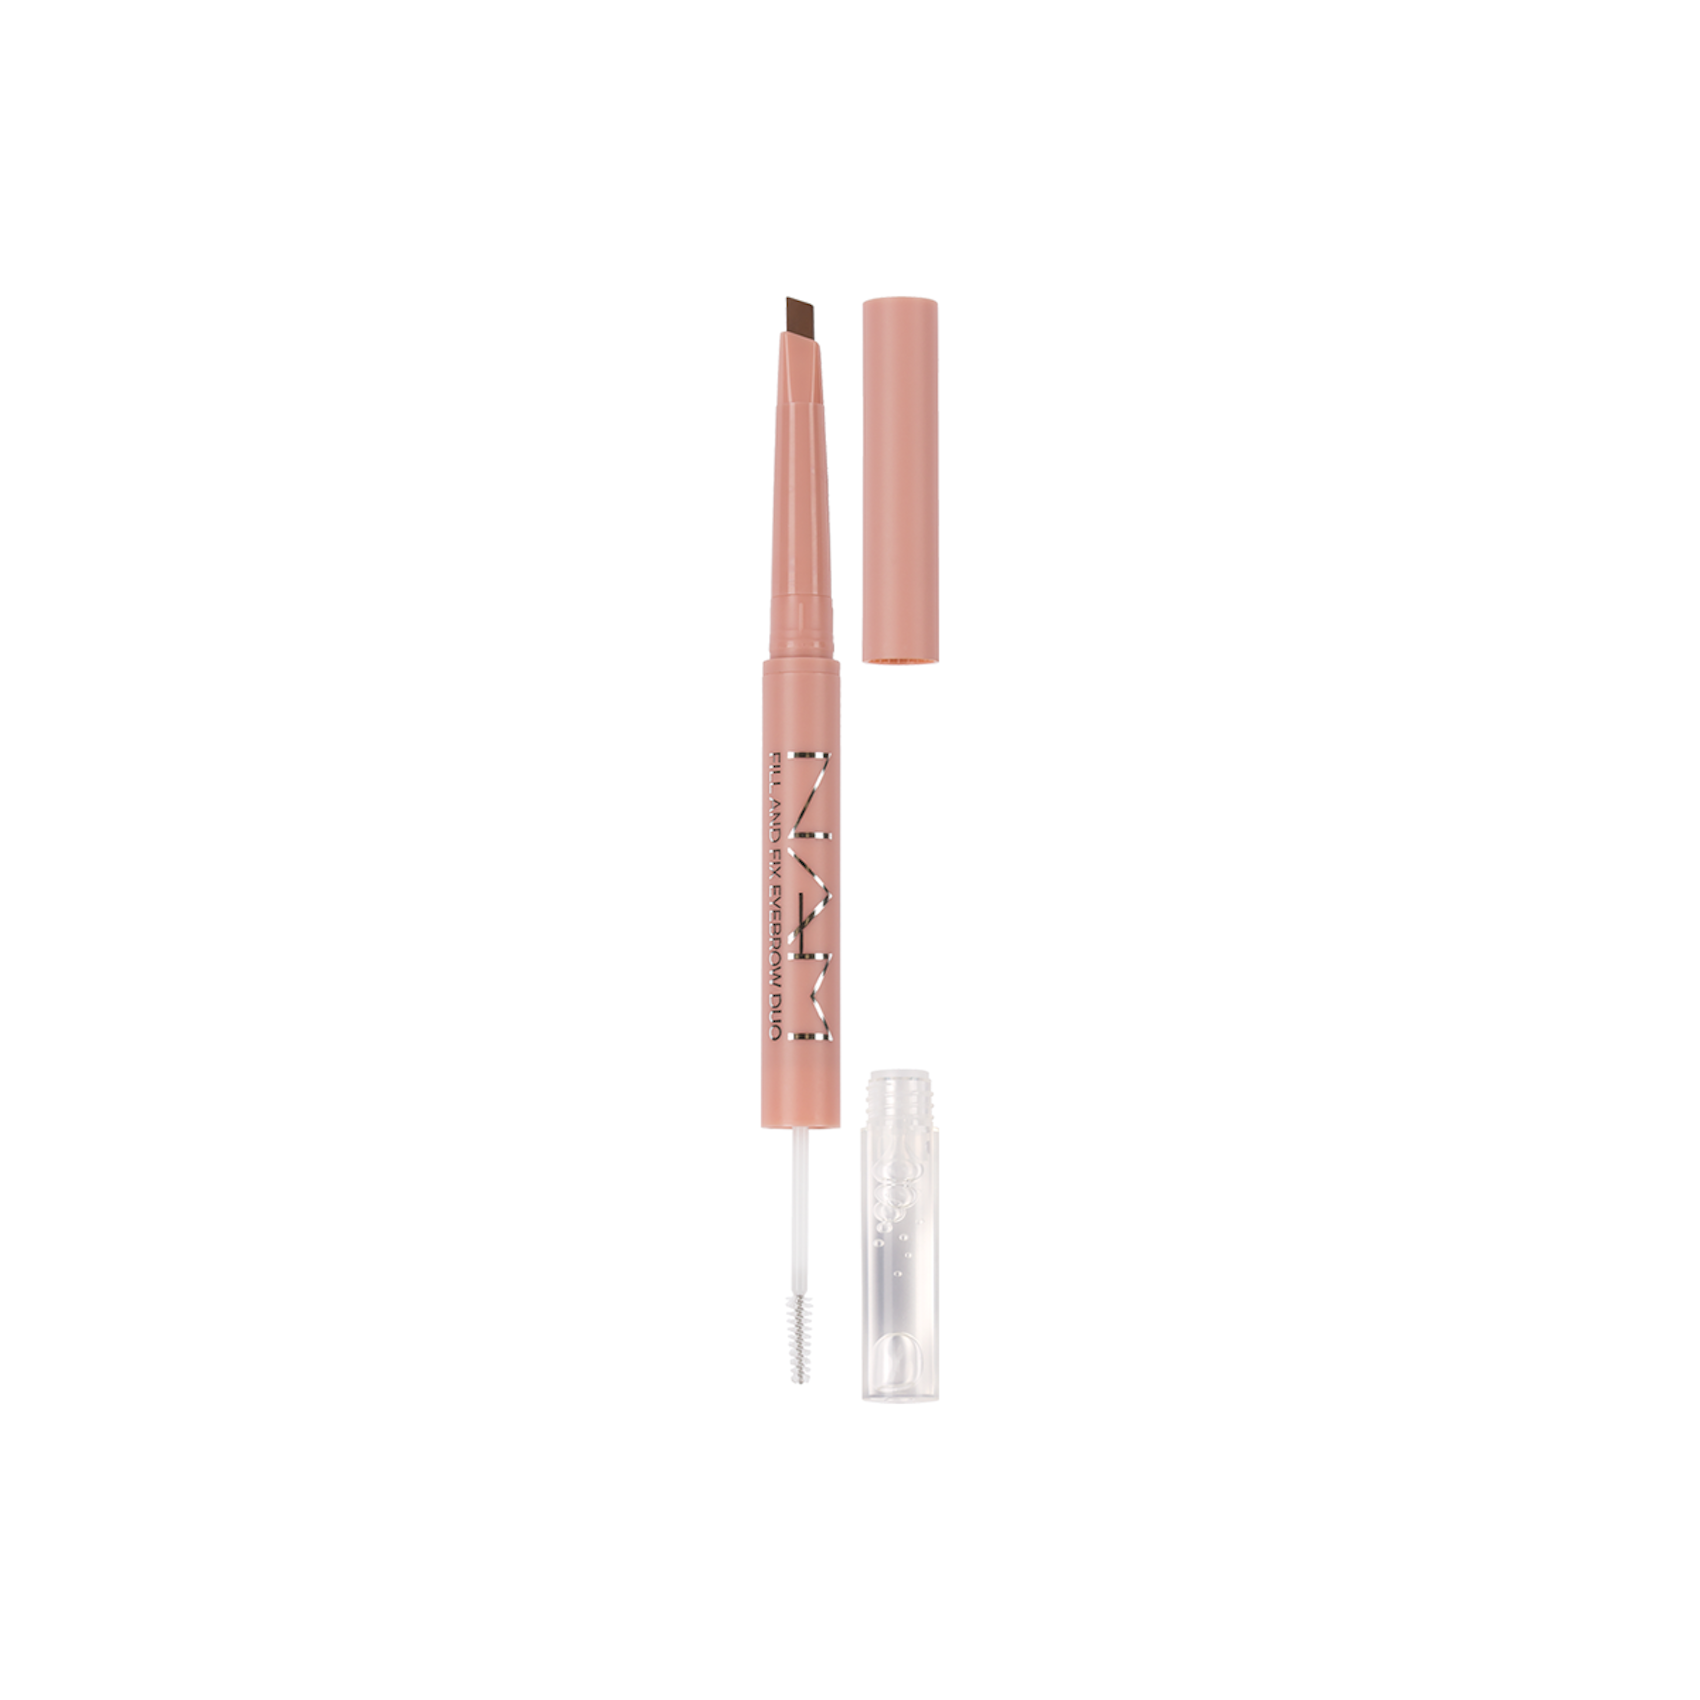 Nam Fill And Fix Eyebrow Duo 01 Neutral Medium Brown